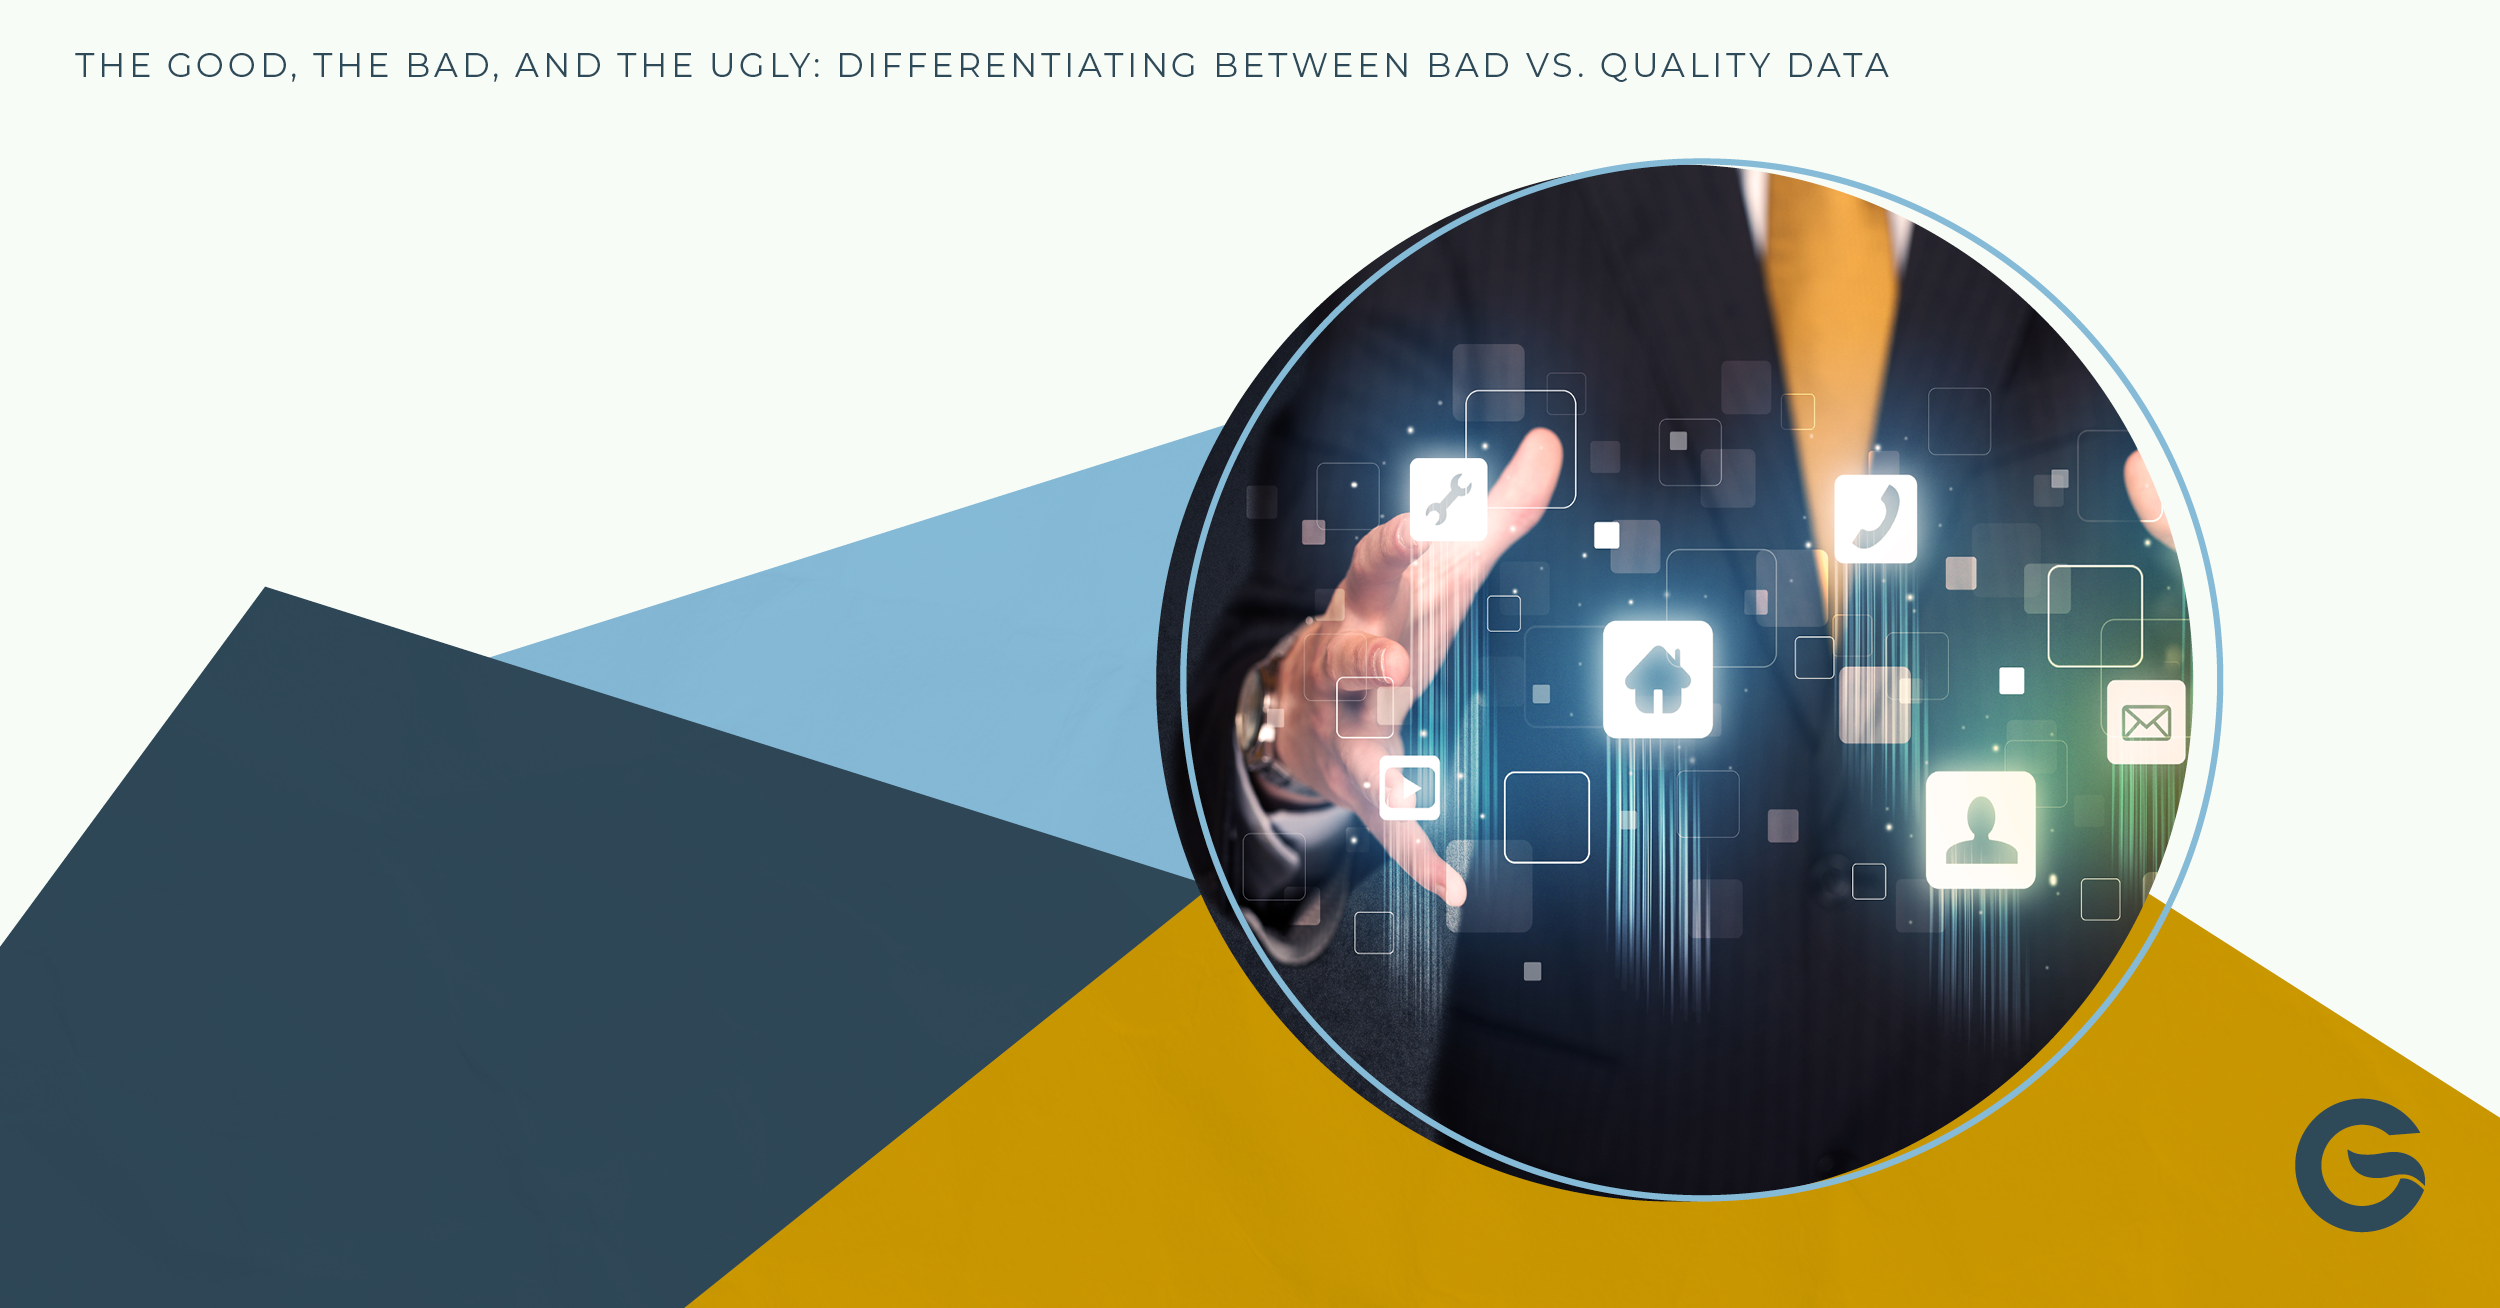 The Good, The Bad, and the Ugly: Differentiating Between Bad vs. Quality Data Image